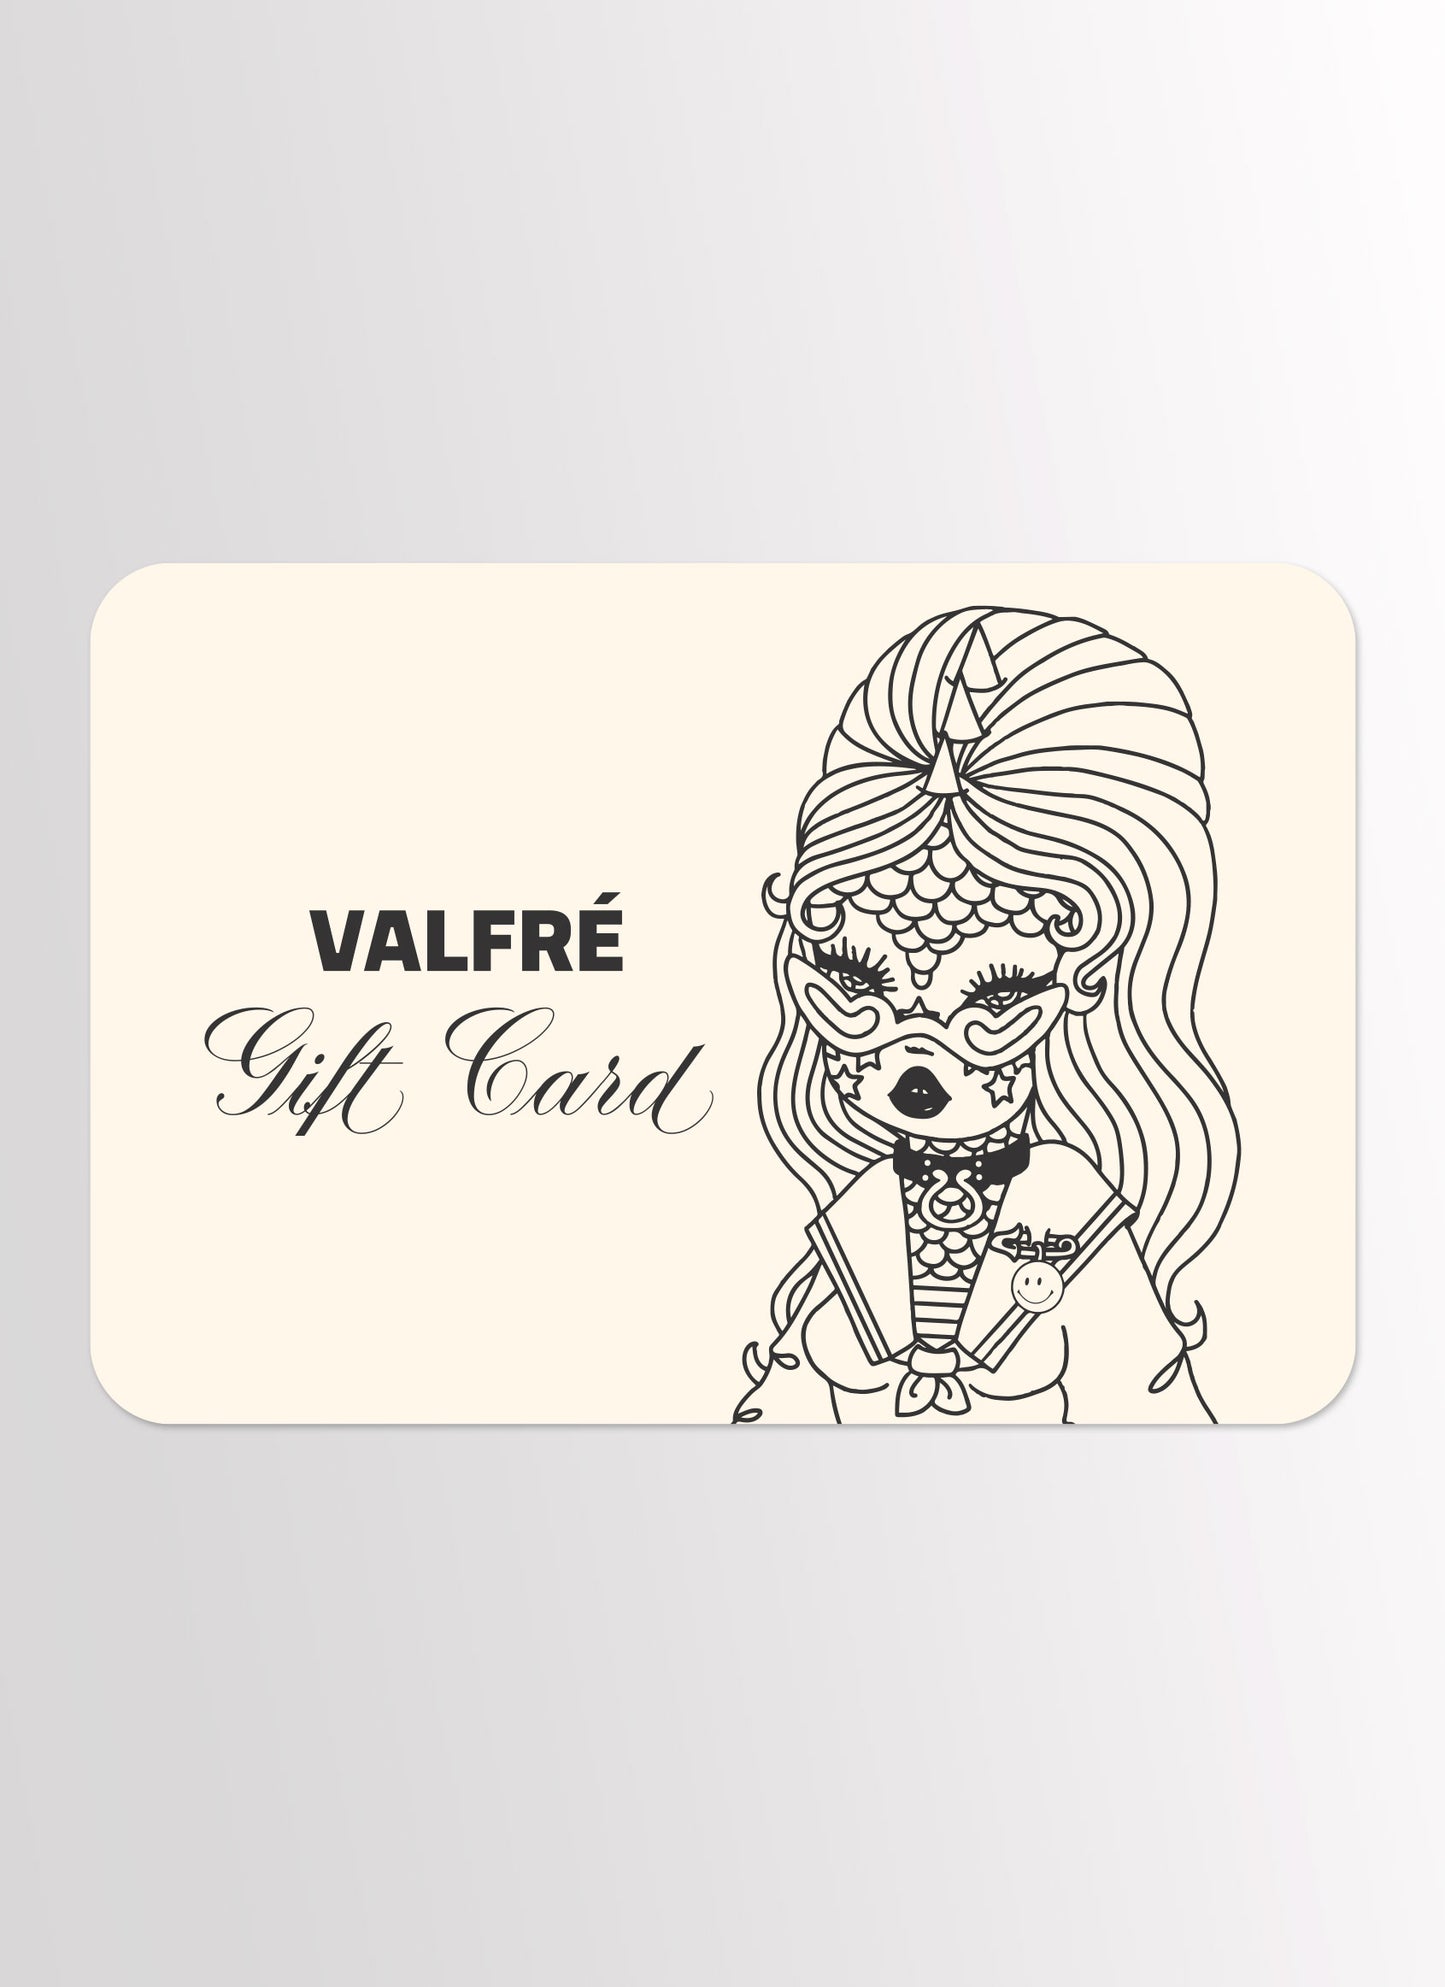 Valfre Gift Card